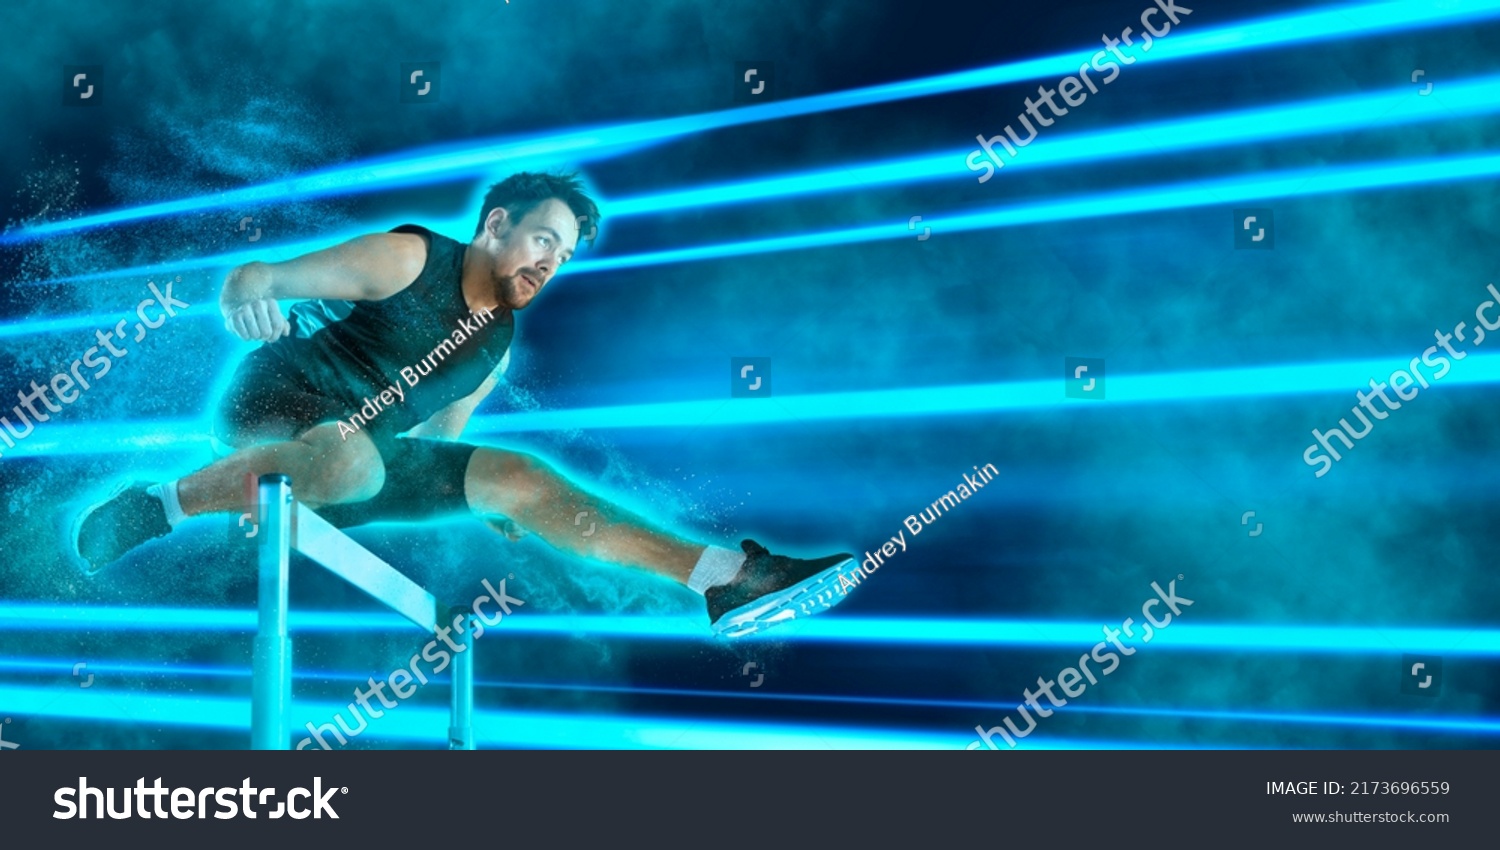 Young male athlete at hurdle race, jumping over the last hurdle. Blue neon background. Sport banner, flyer #2173696559